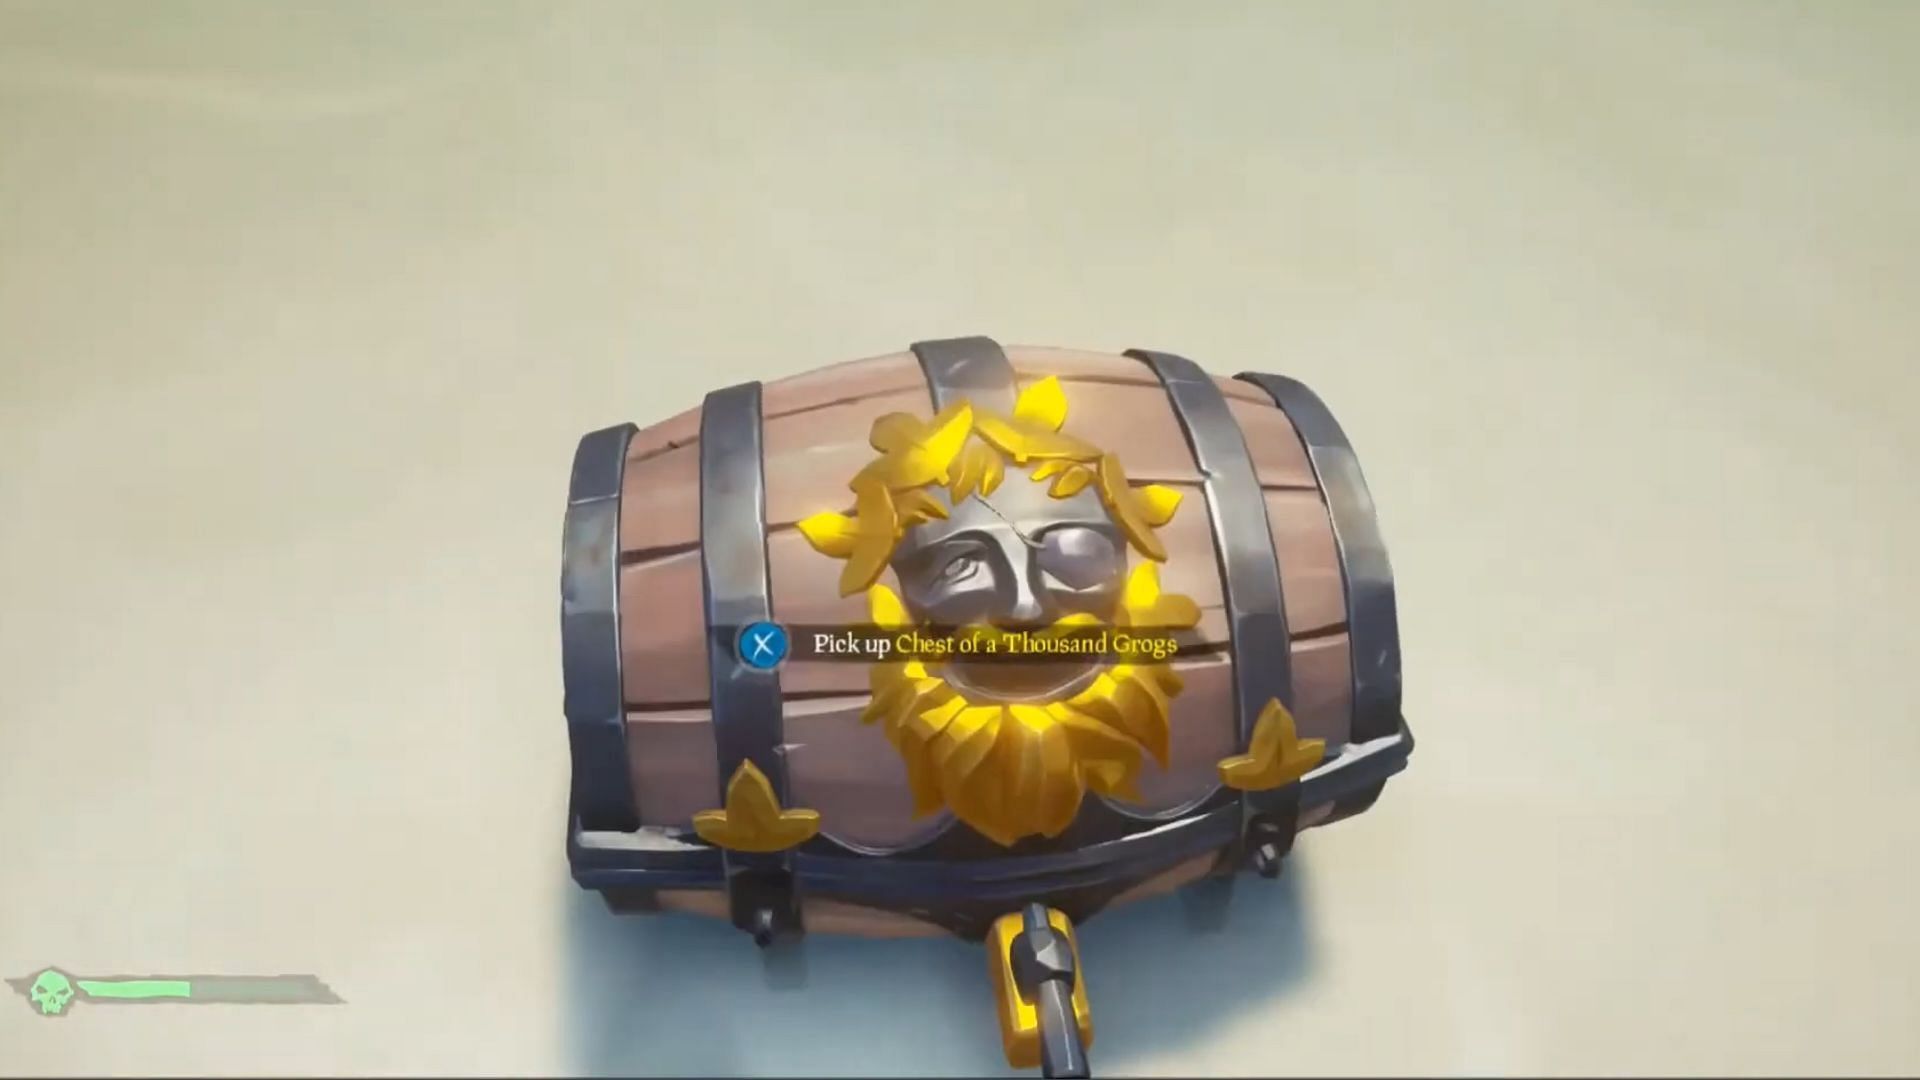 Carrying it makes your vision hazy (Image via Sea of Thieves)